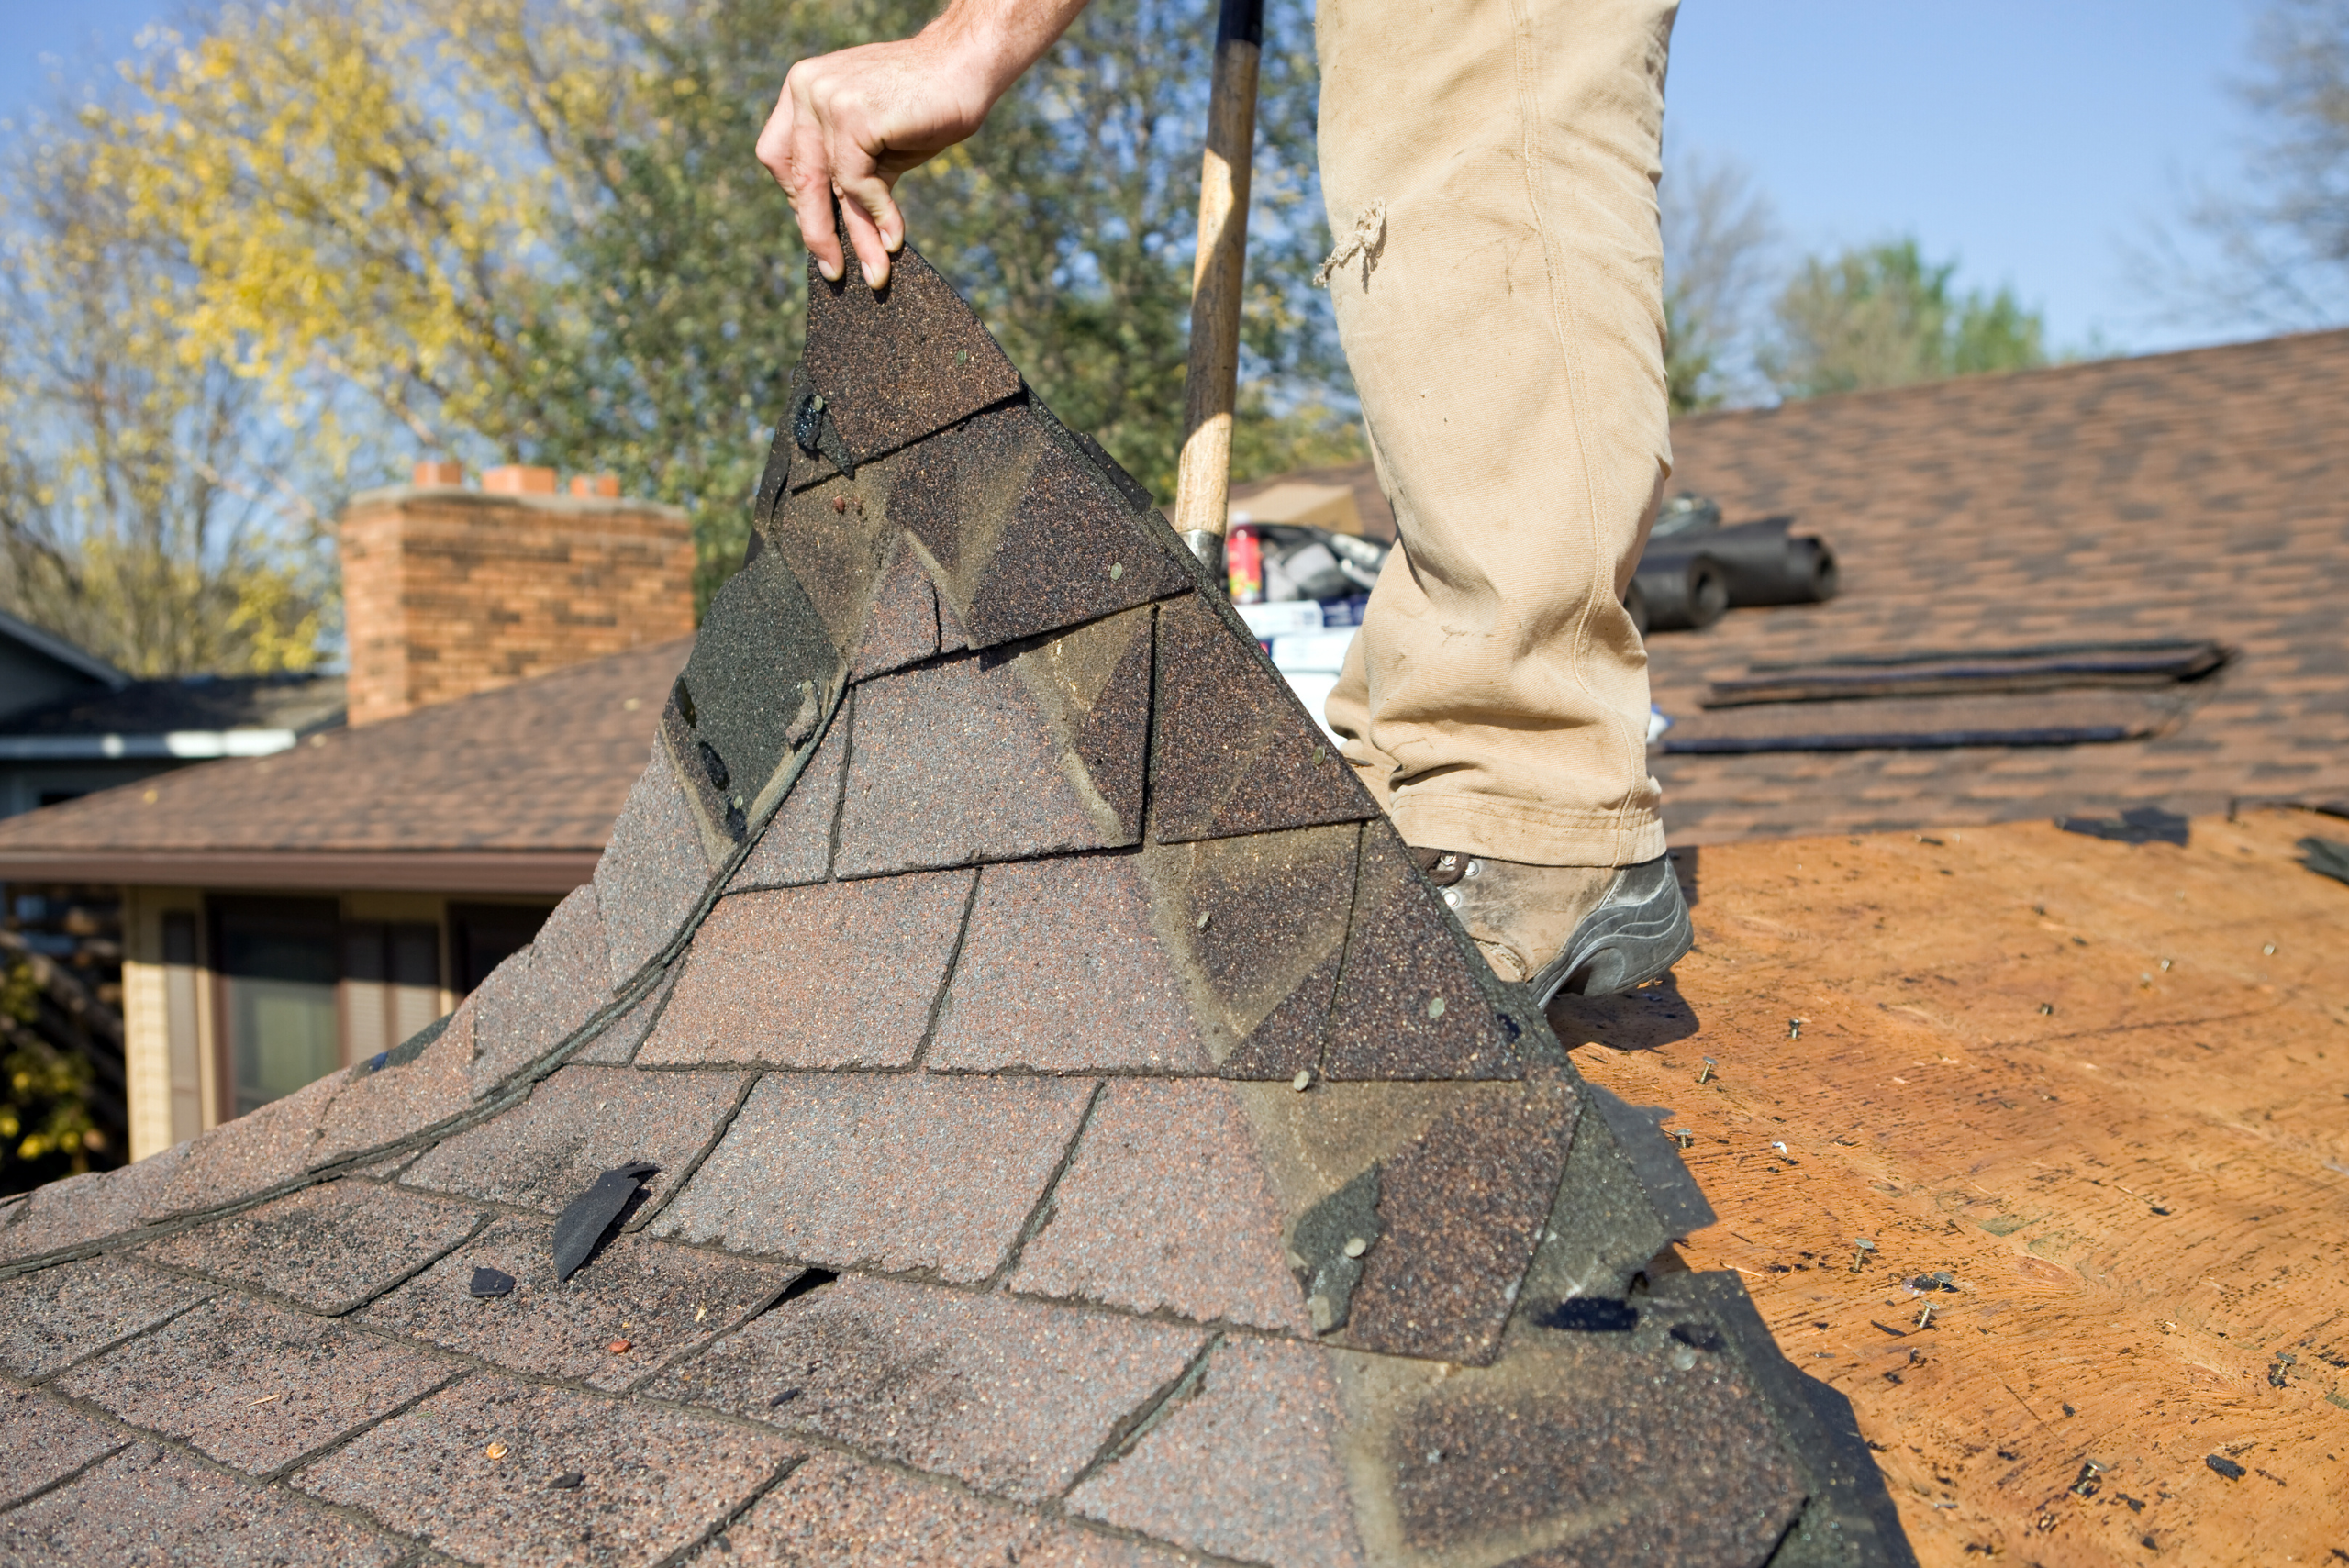 Roofer removing shingles from roof.